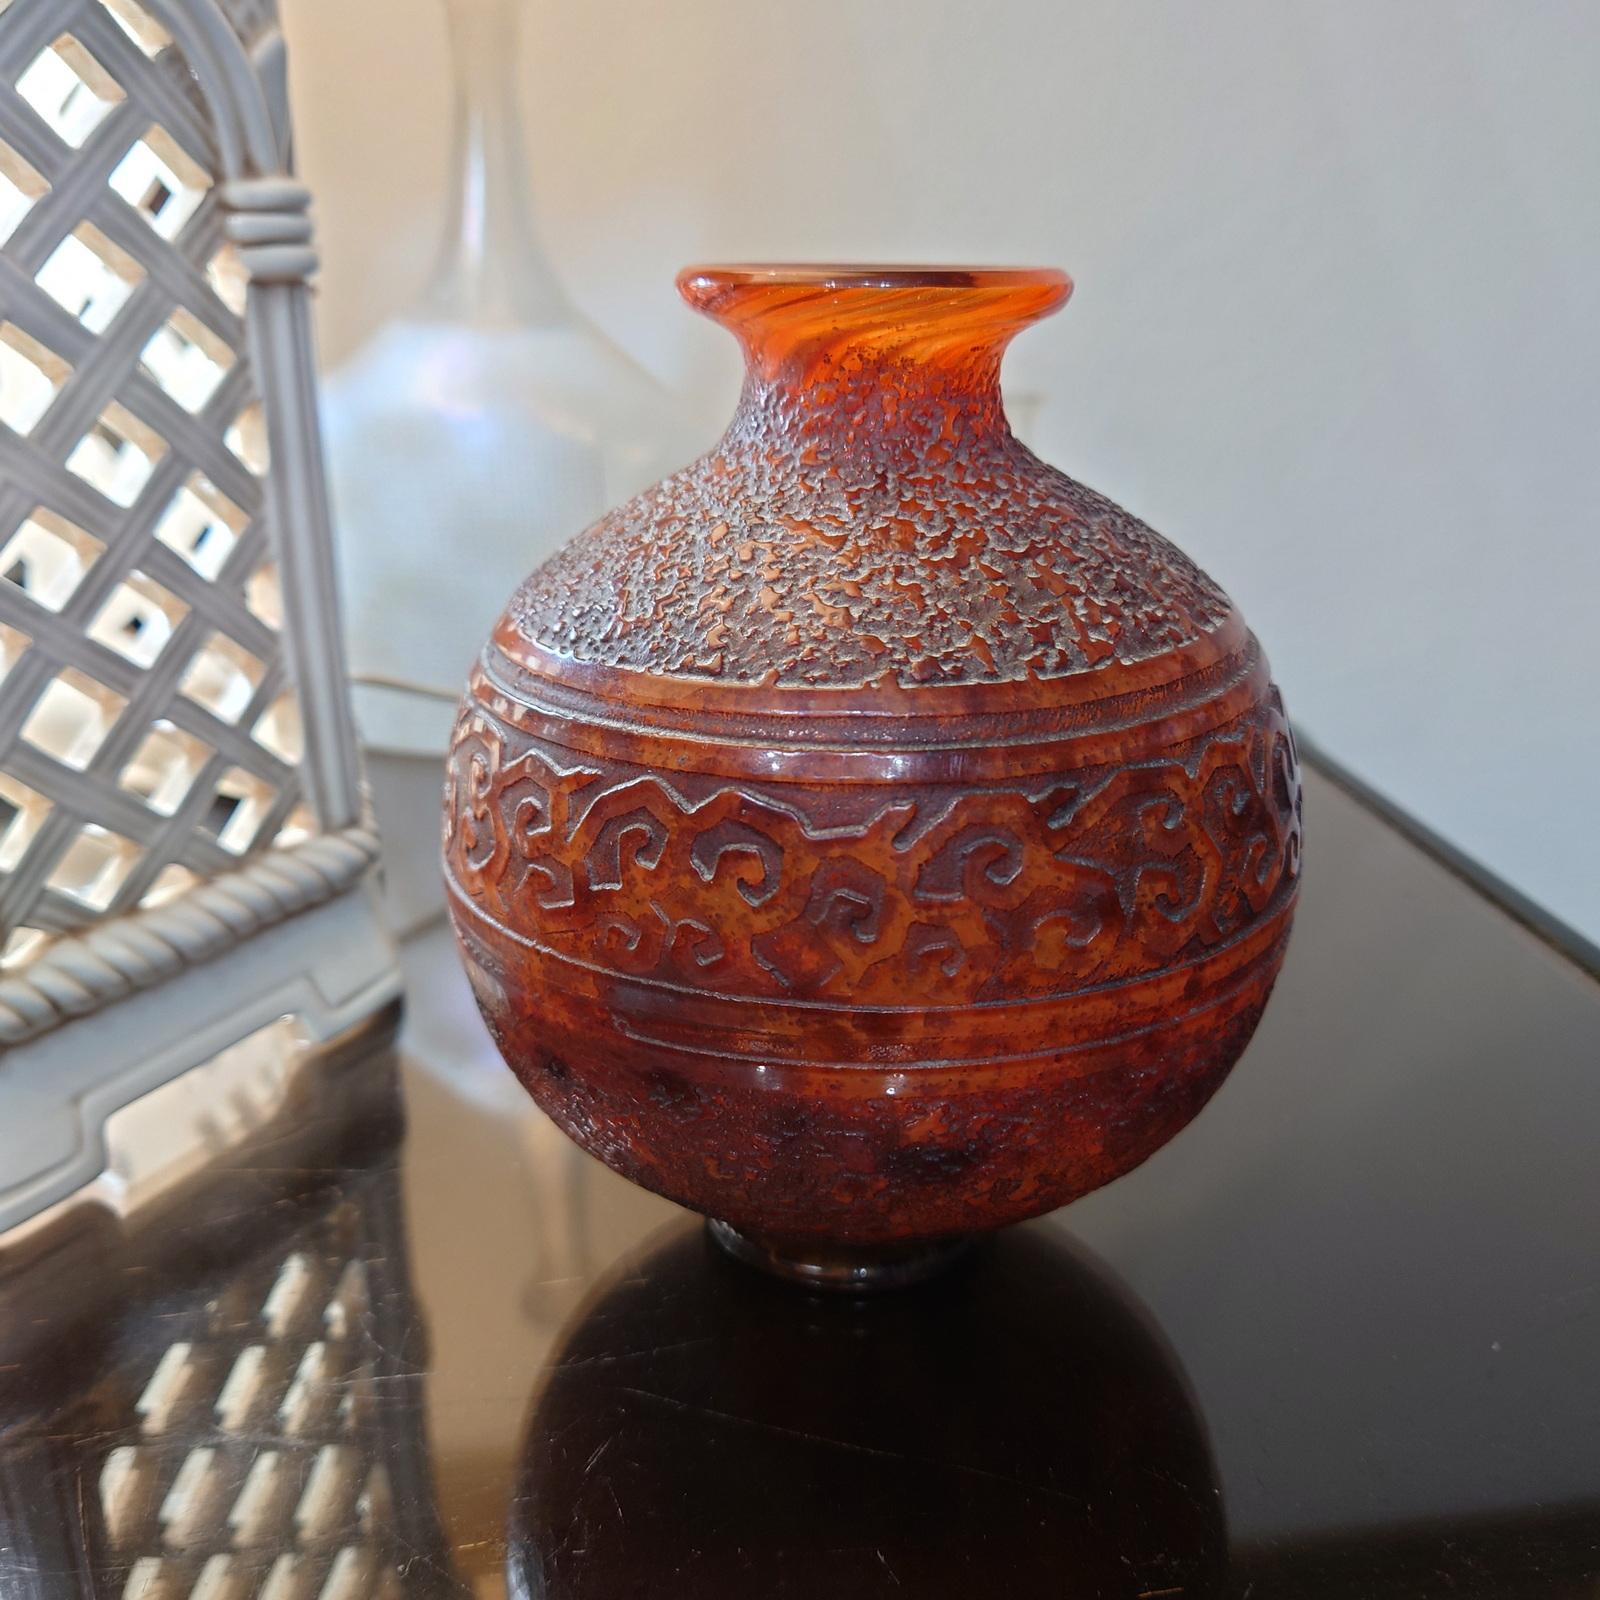 Daum Nancy Art Deco Glass Vase, ball-shaped, resting on a round base, with a narrow, flared mouth.
This glass ball vase is made of orange-red tinted glass decorated with brown intercalated powders and engraved with a scroll frieze on an acid-frosted